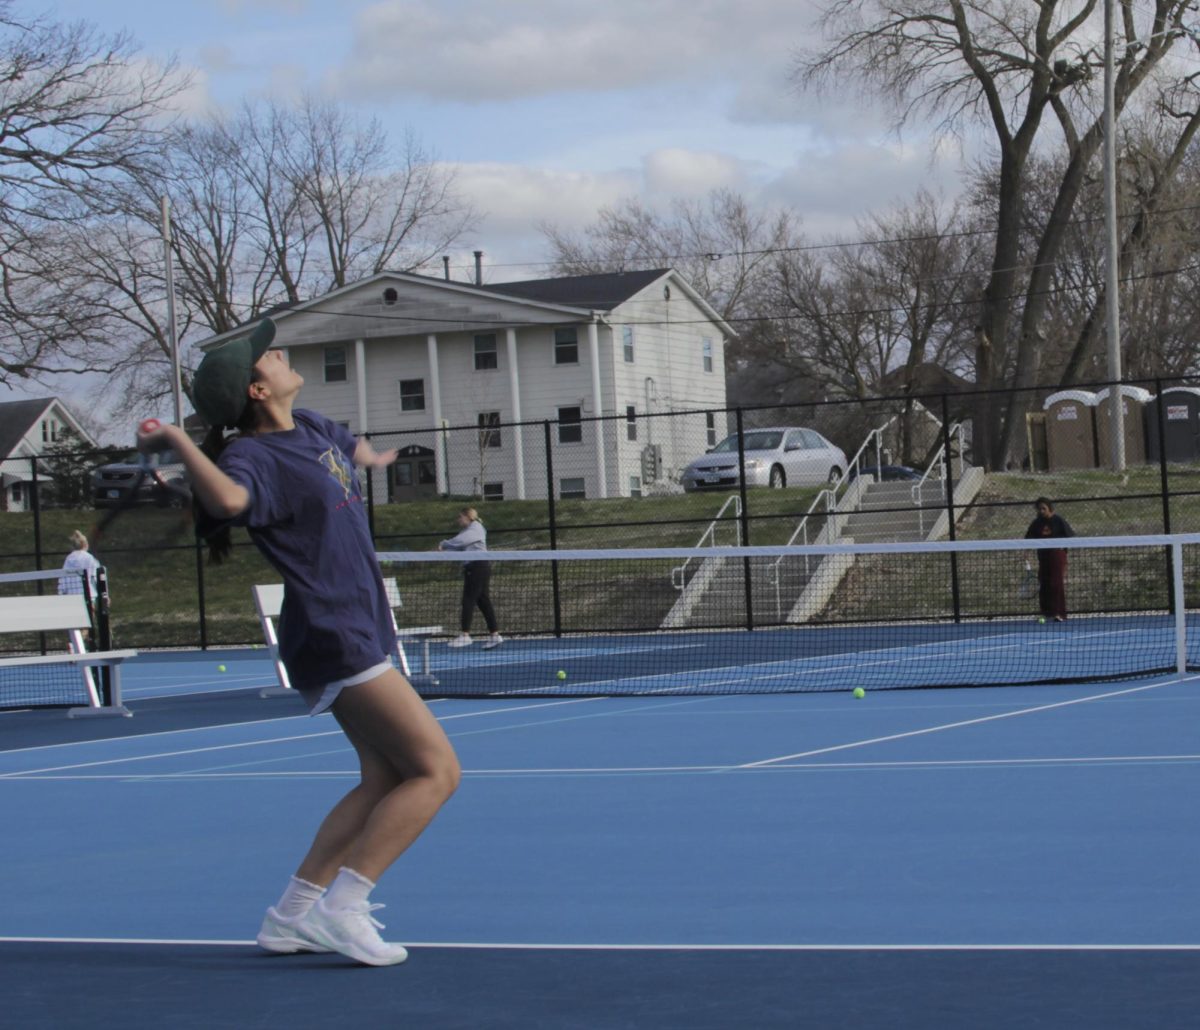 Augustana+College+women%E2%80%99s+tennis+team+practices+on+the+new+Lincoln+Park+Tennis+Court+near+Swanson%2C+equipped+with+benches.